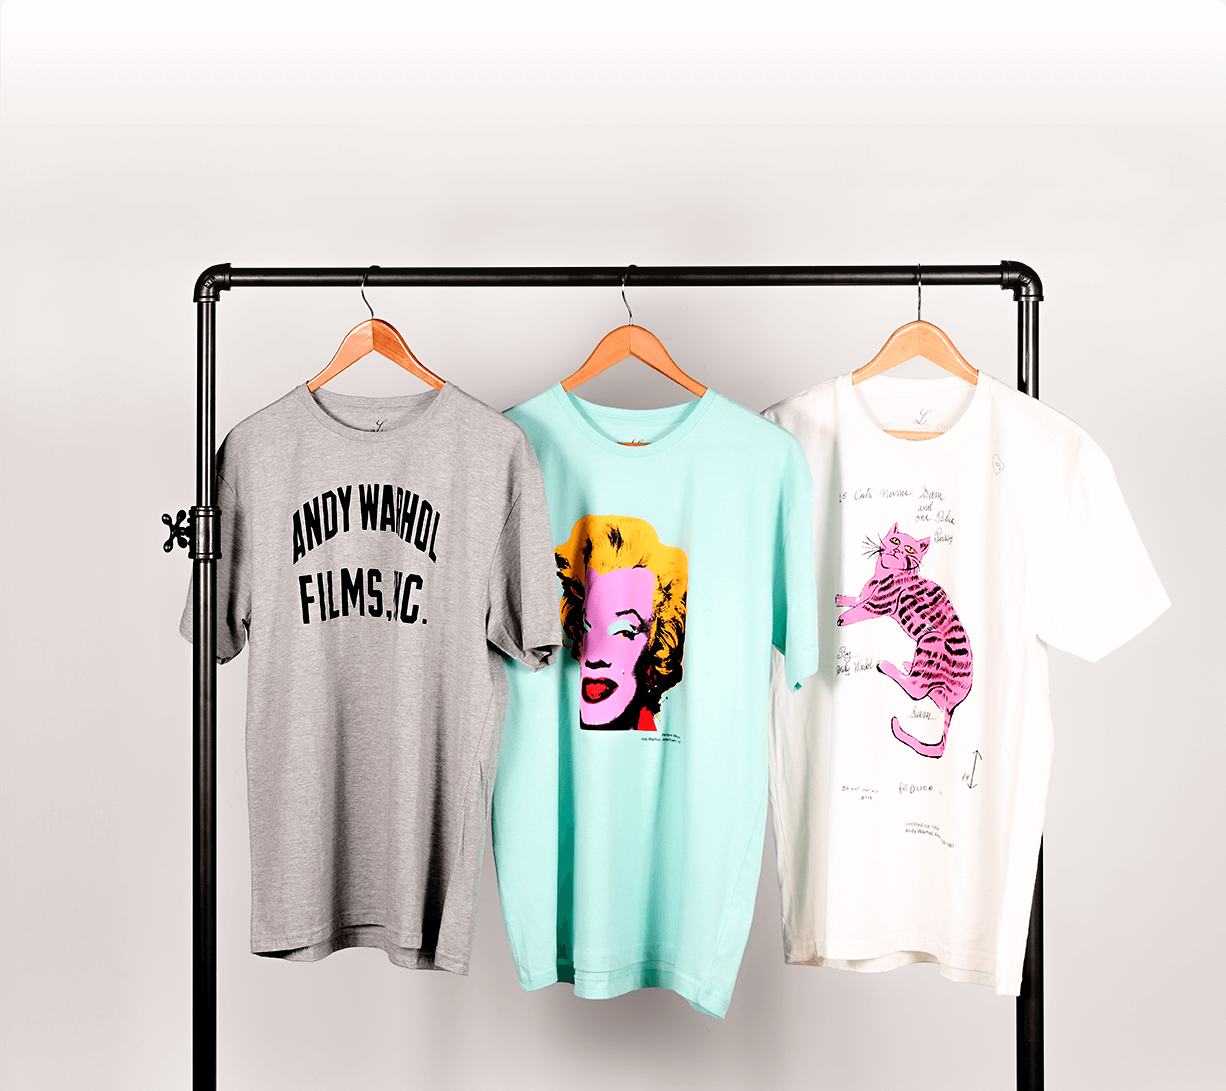 Shirts printed by Clockwise with designs from Andy Warhol.